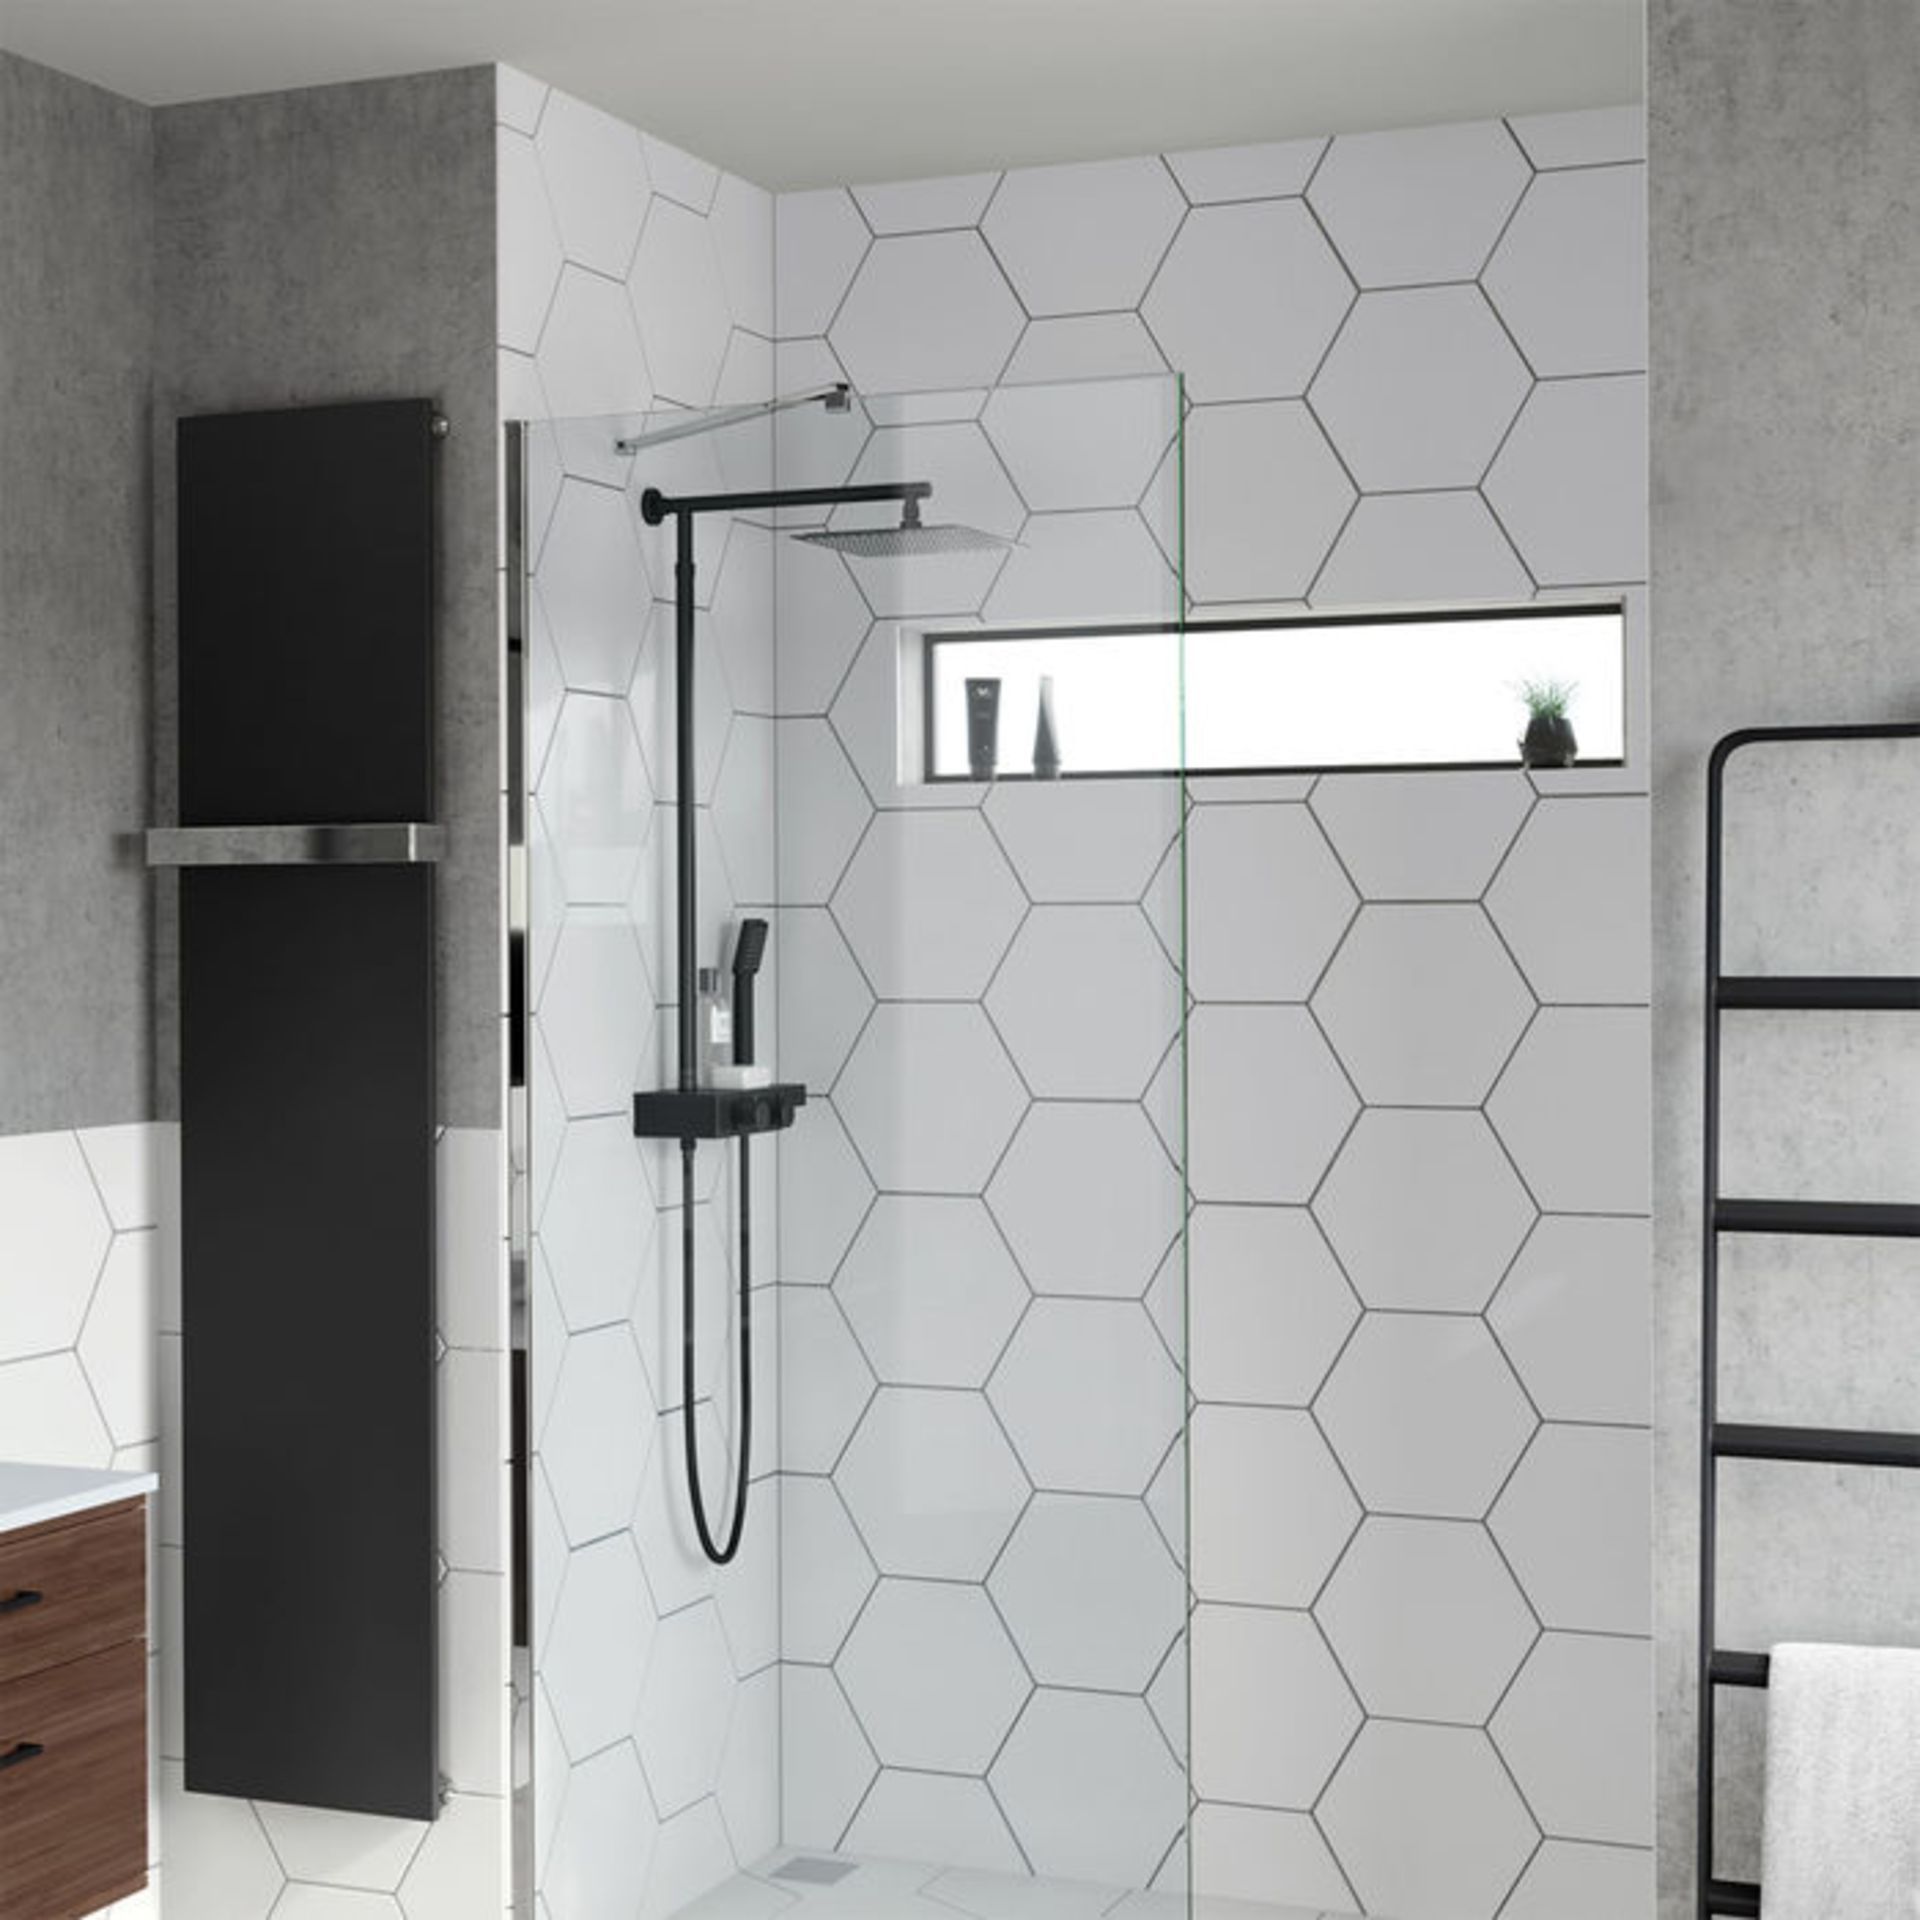 NEW & BOXDED Matte Black Square Thermostatic Mixer Shower Kit & Shelf. RRP £599.99.SP510... - Image 3 of 3